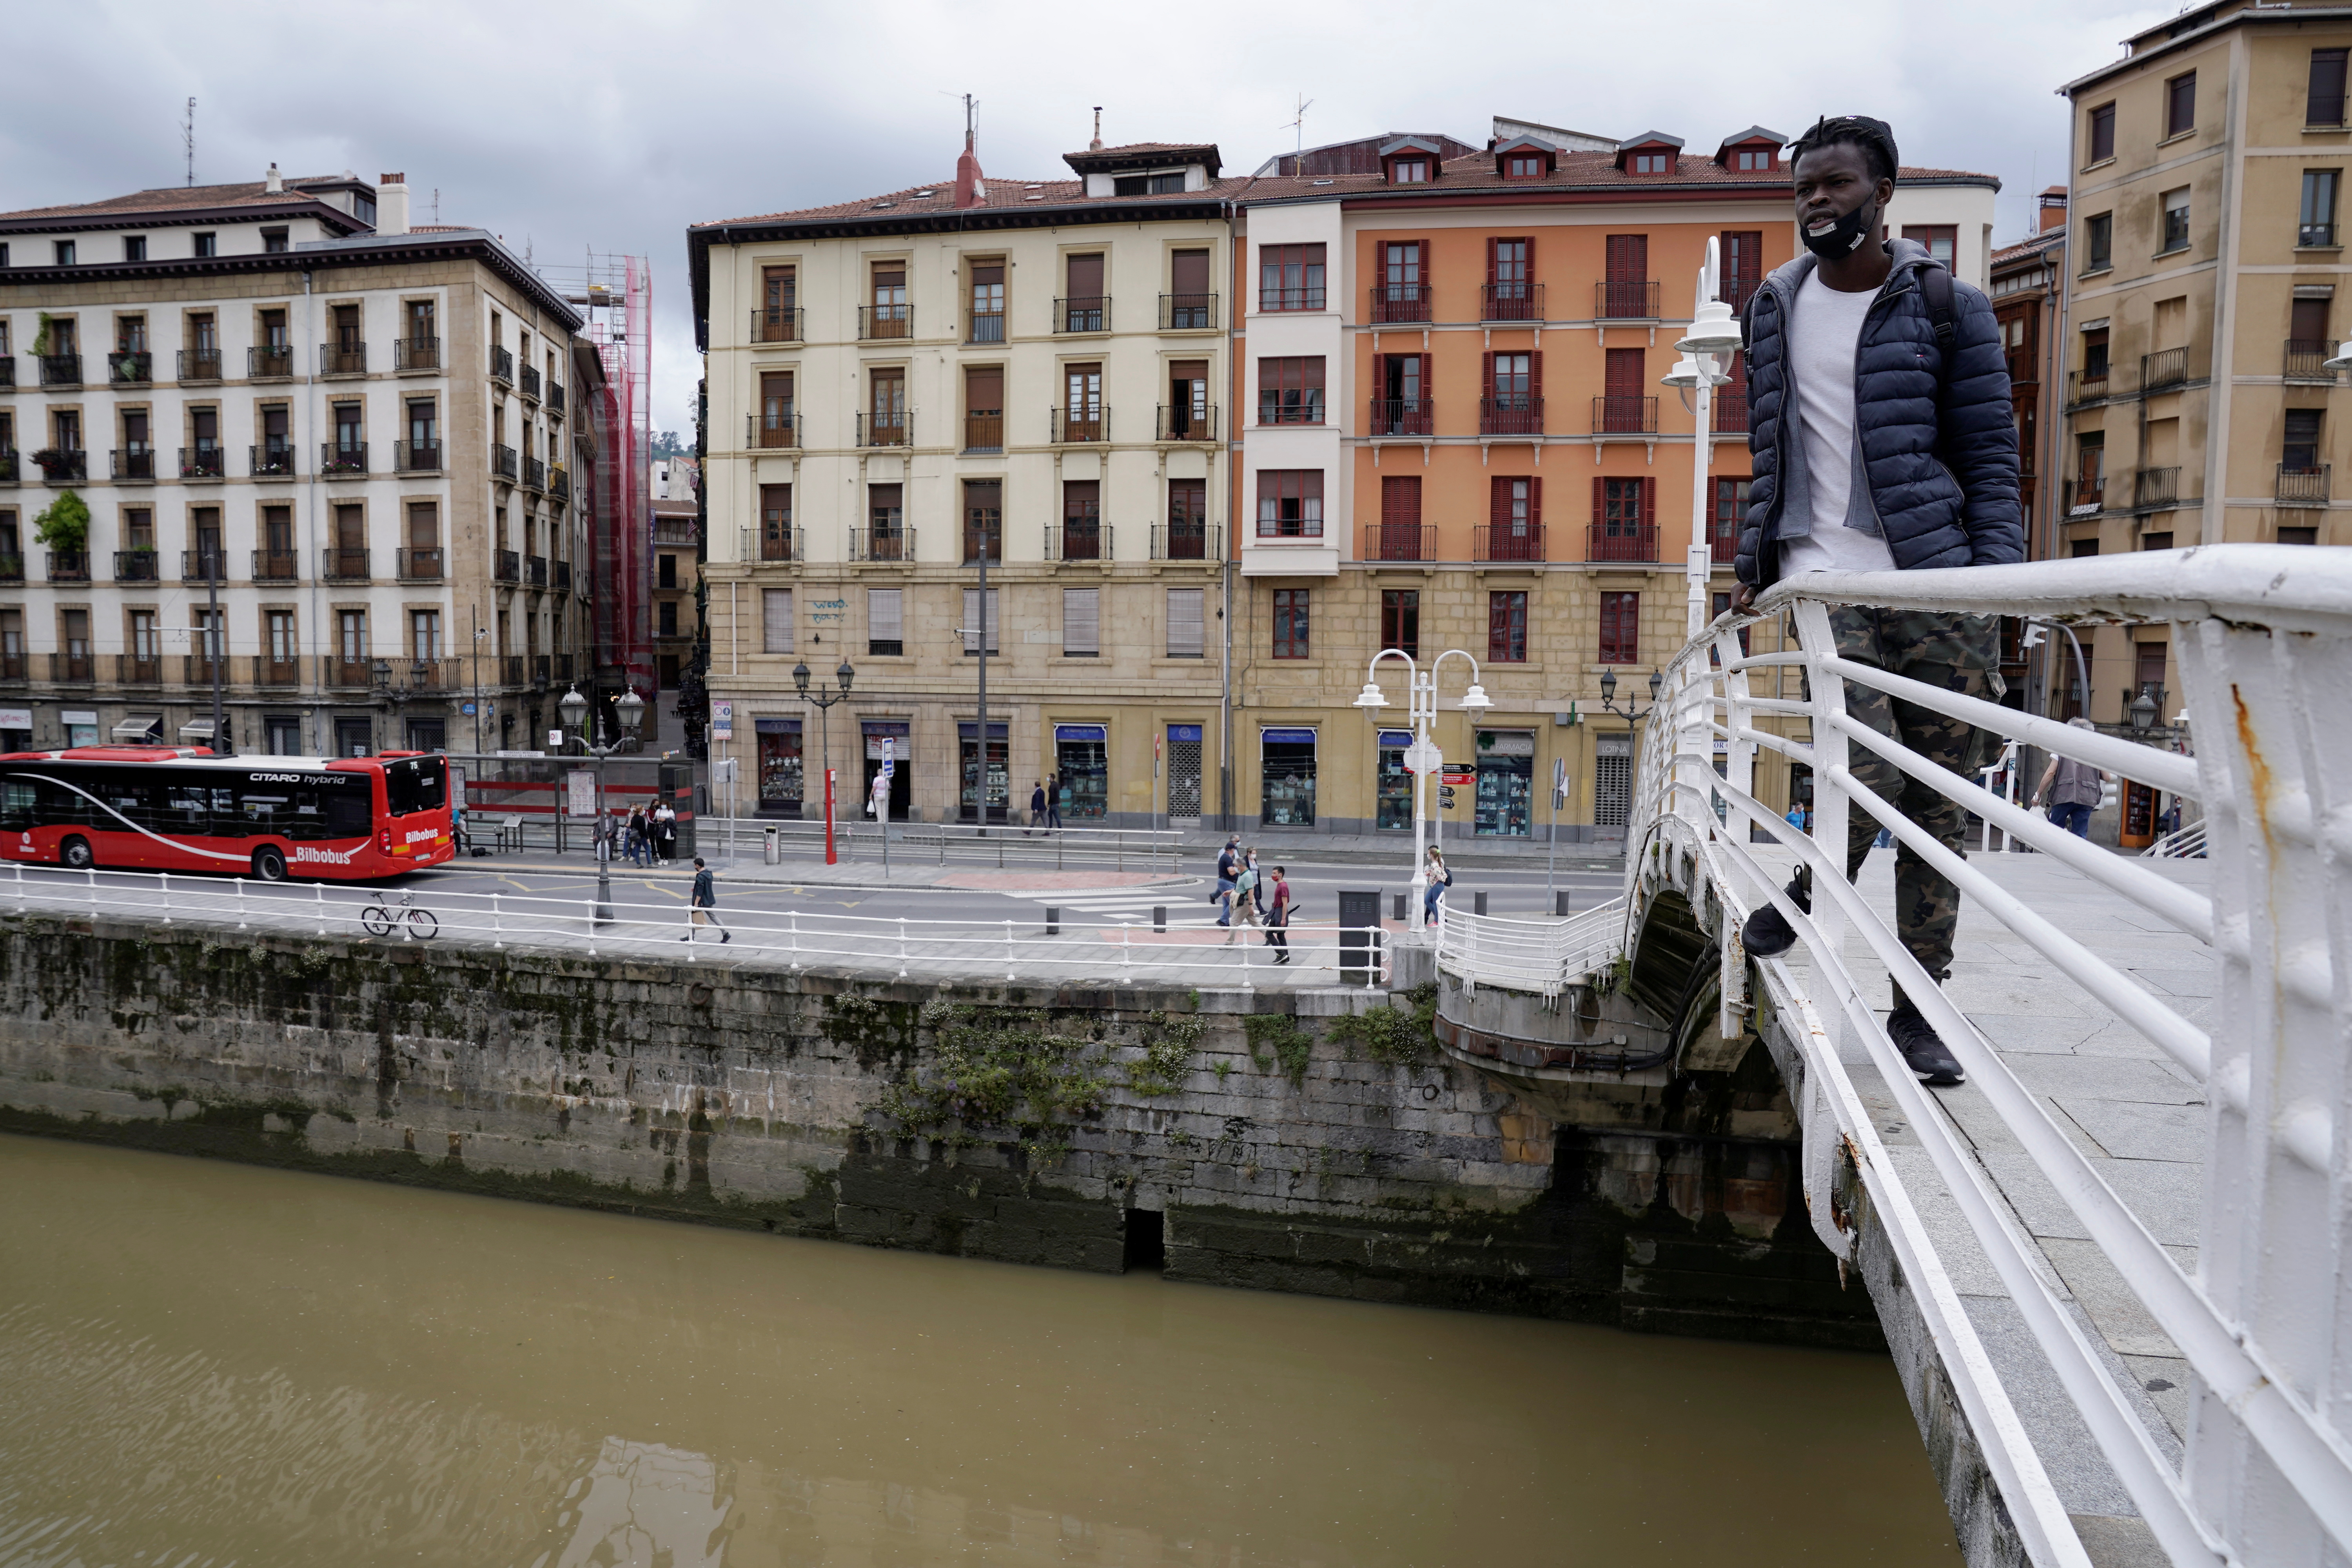 Mohamed Fadal Diouf, 26, from Senegal, stands on a pedestrian bridge over the river Nervion in Bilbao